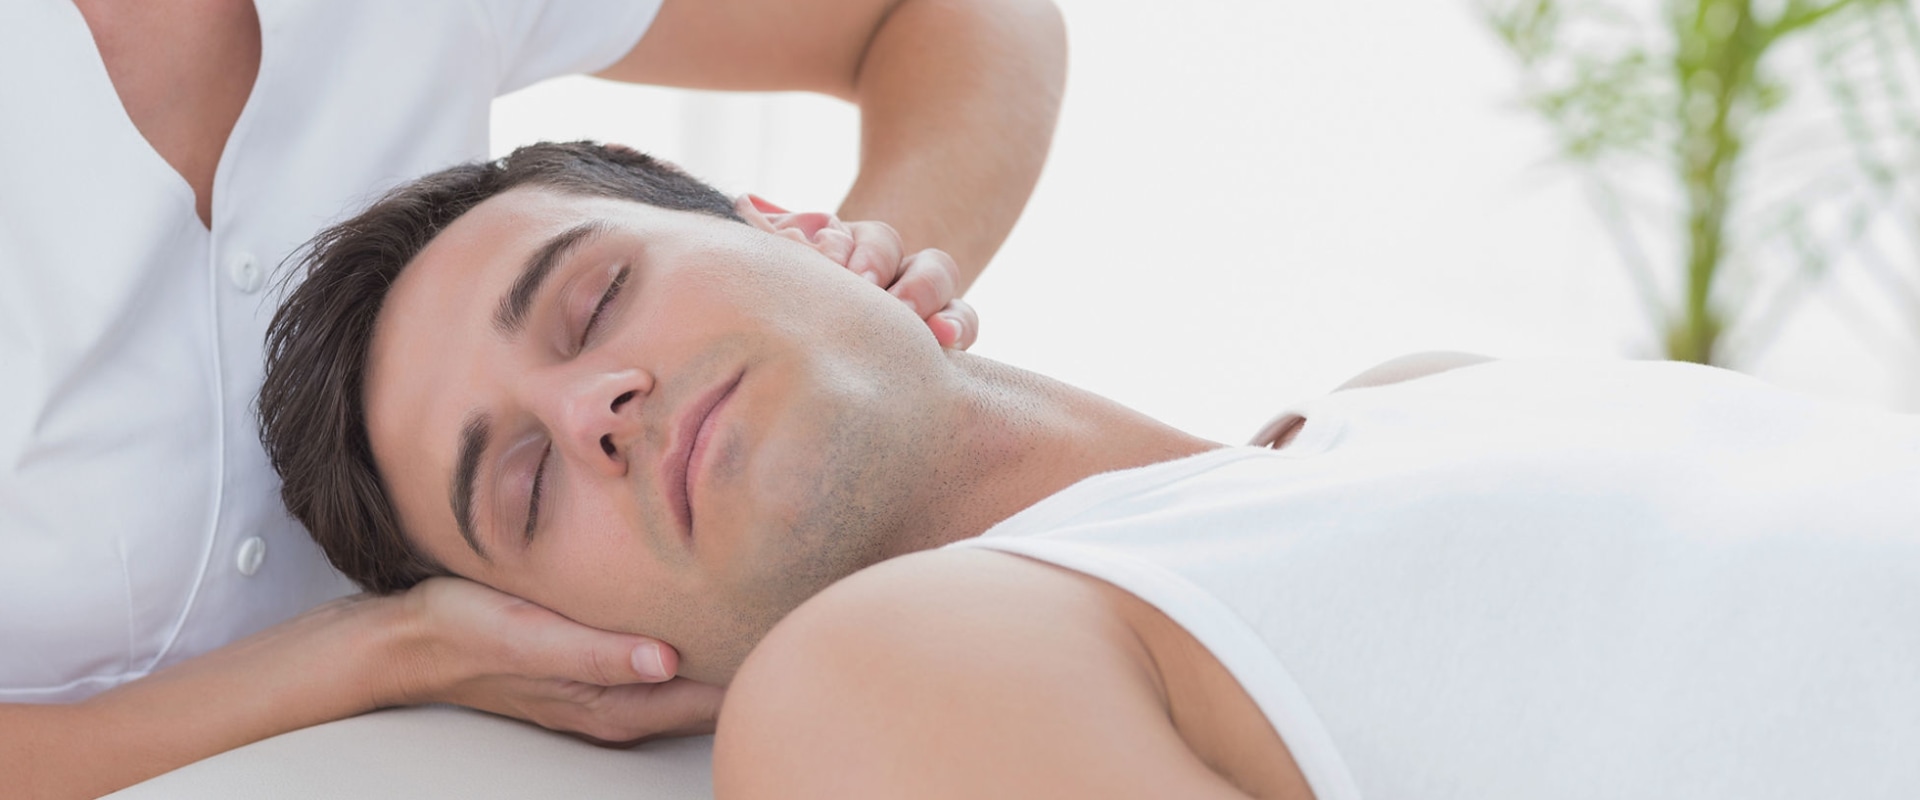 North York Massage Therapist: Getting Relief From Back Injuries With The Right Massage Treatment